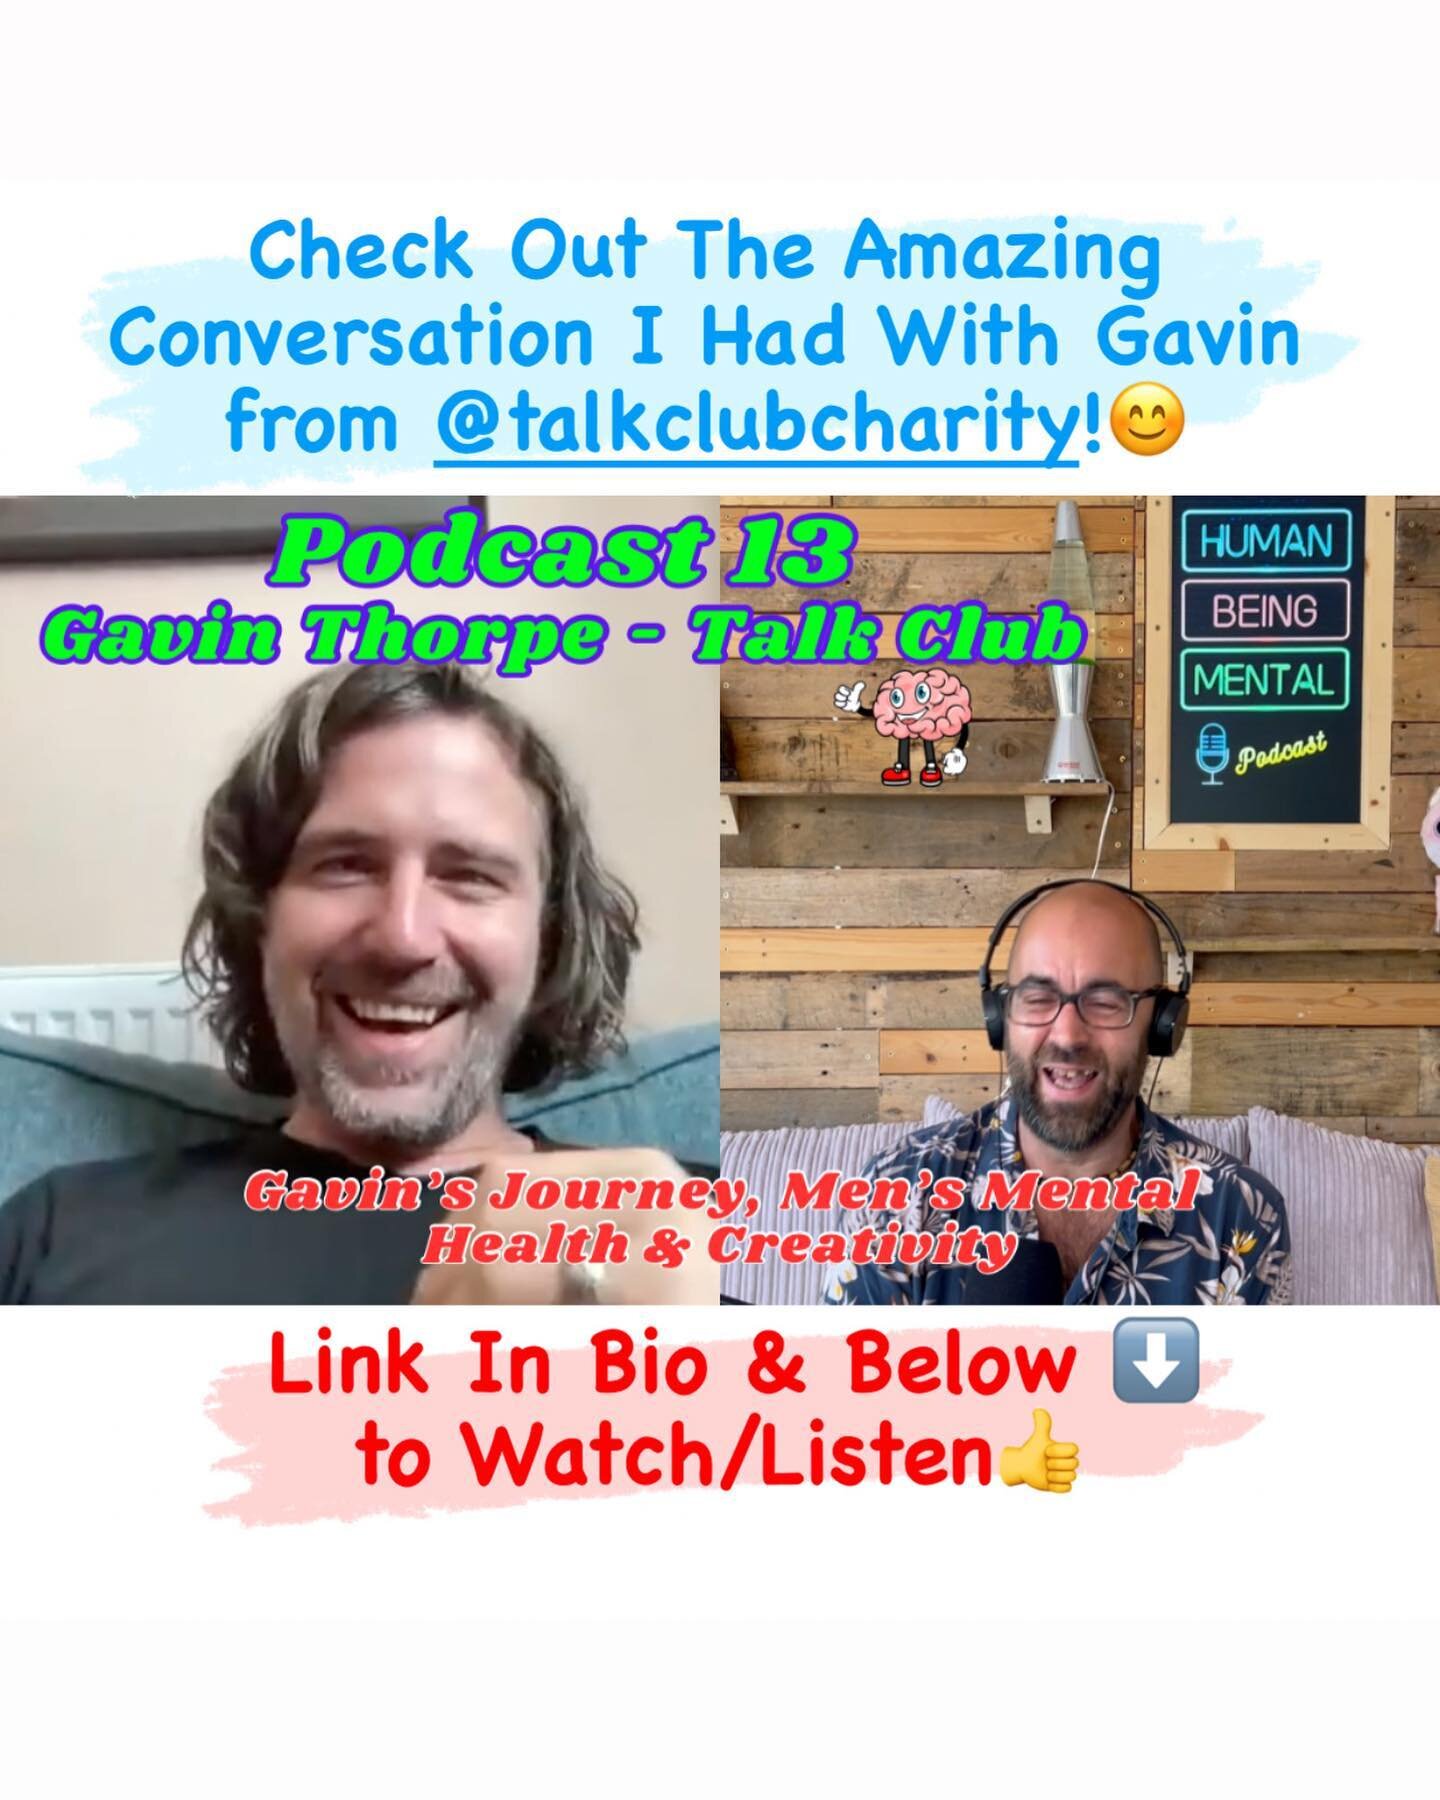 Link to podcast here; https://koji.to/Human_Being_Mental #podcast #talkclub #howareyououtof10 #humanbeingmental #mensmentalhealth #mentalhealthpodcasts